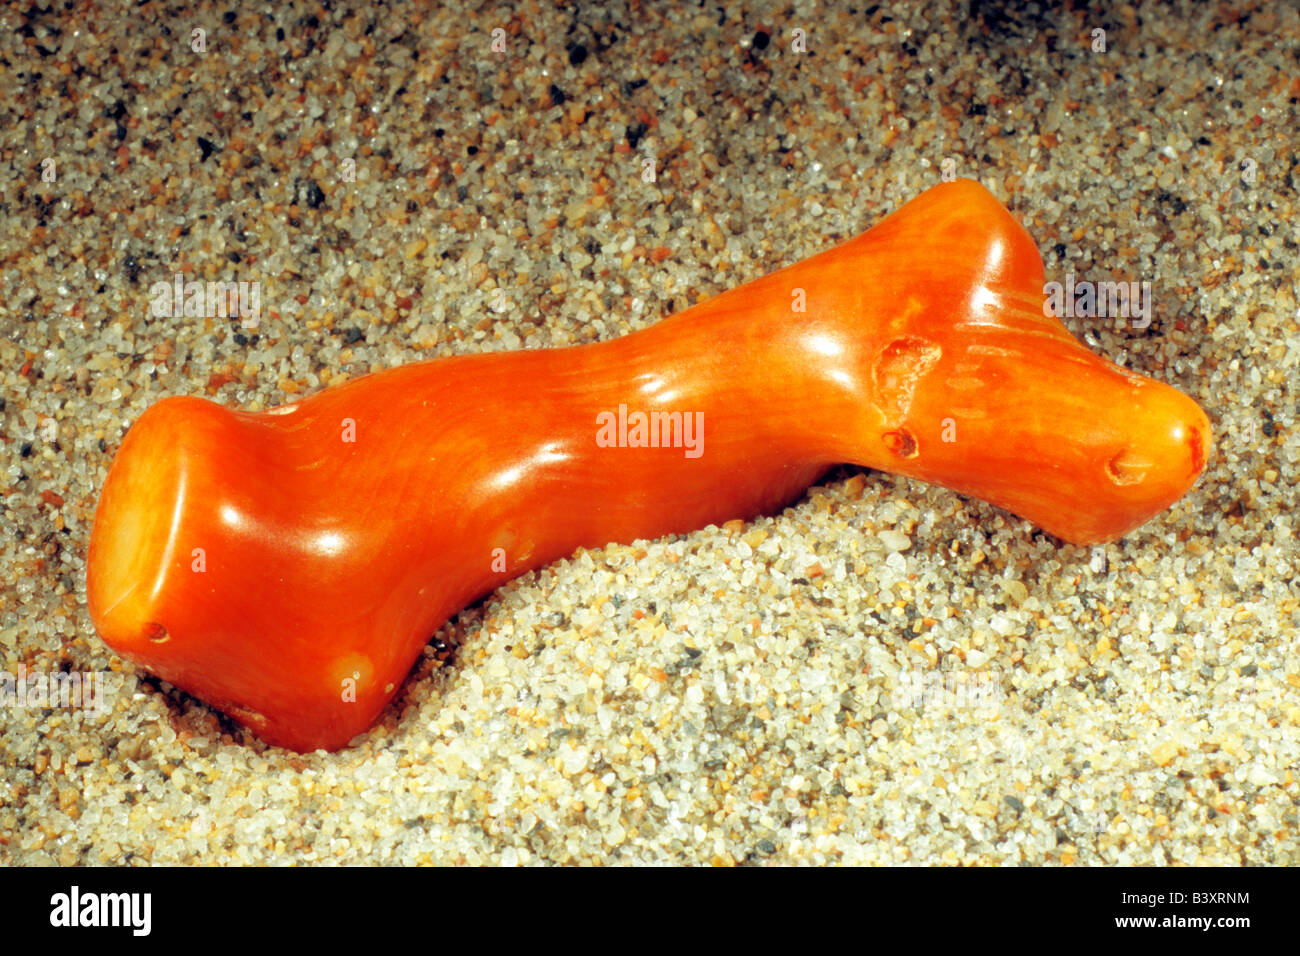 Polished piece of a Red Coral (Corallium rubrum) on sand Stock Photo